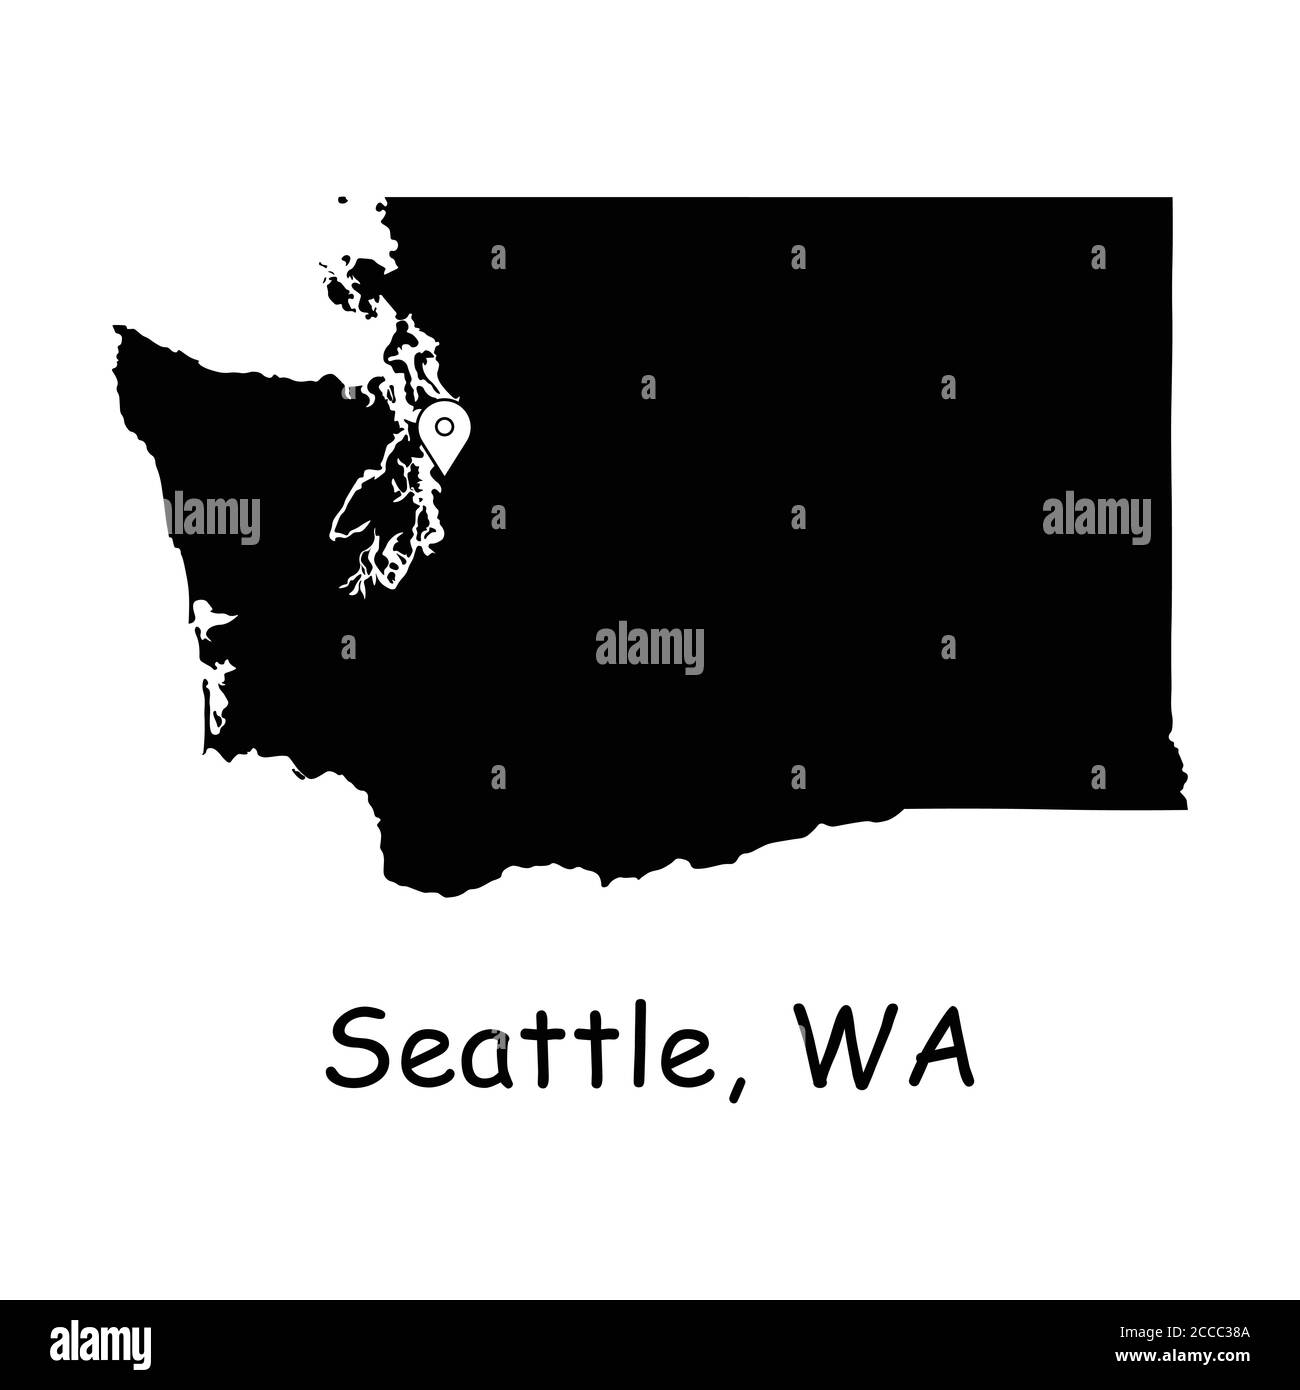 Seattle on Washington State Map. Detailed WA State Map with Location Pin on Seattle City. Black silhouette vector map isolated on white background. Stock Vector